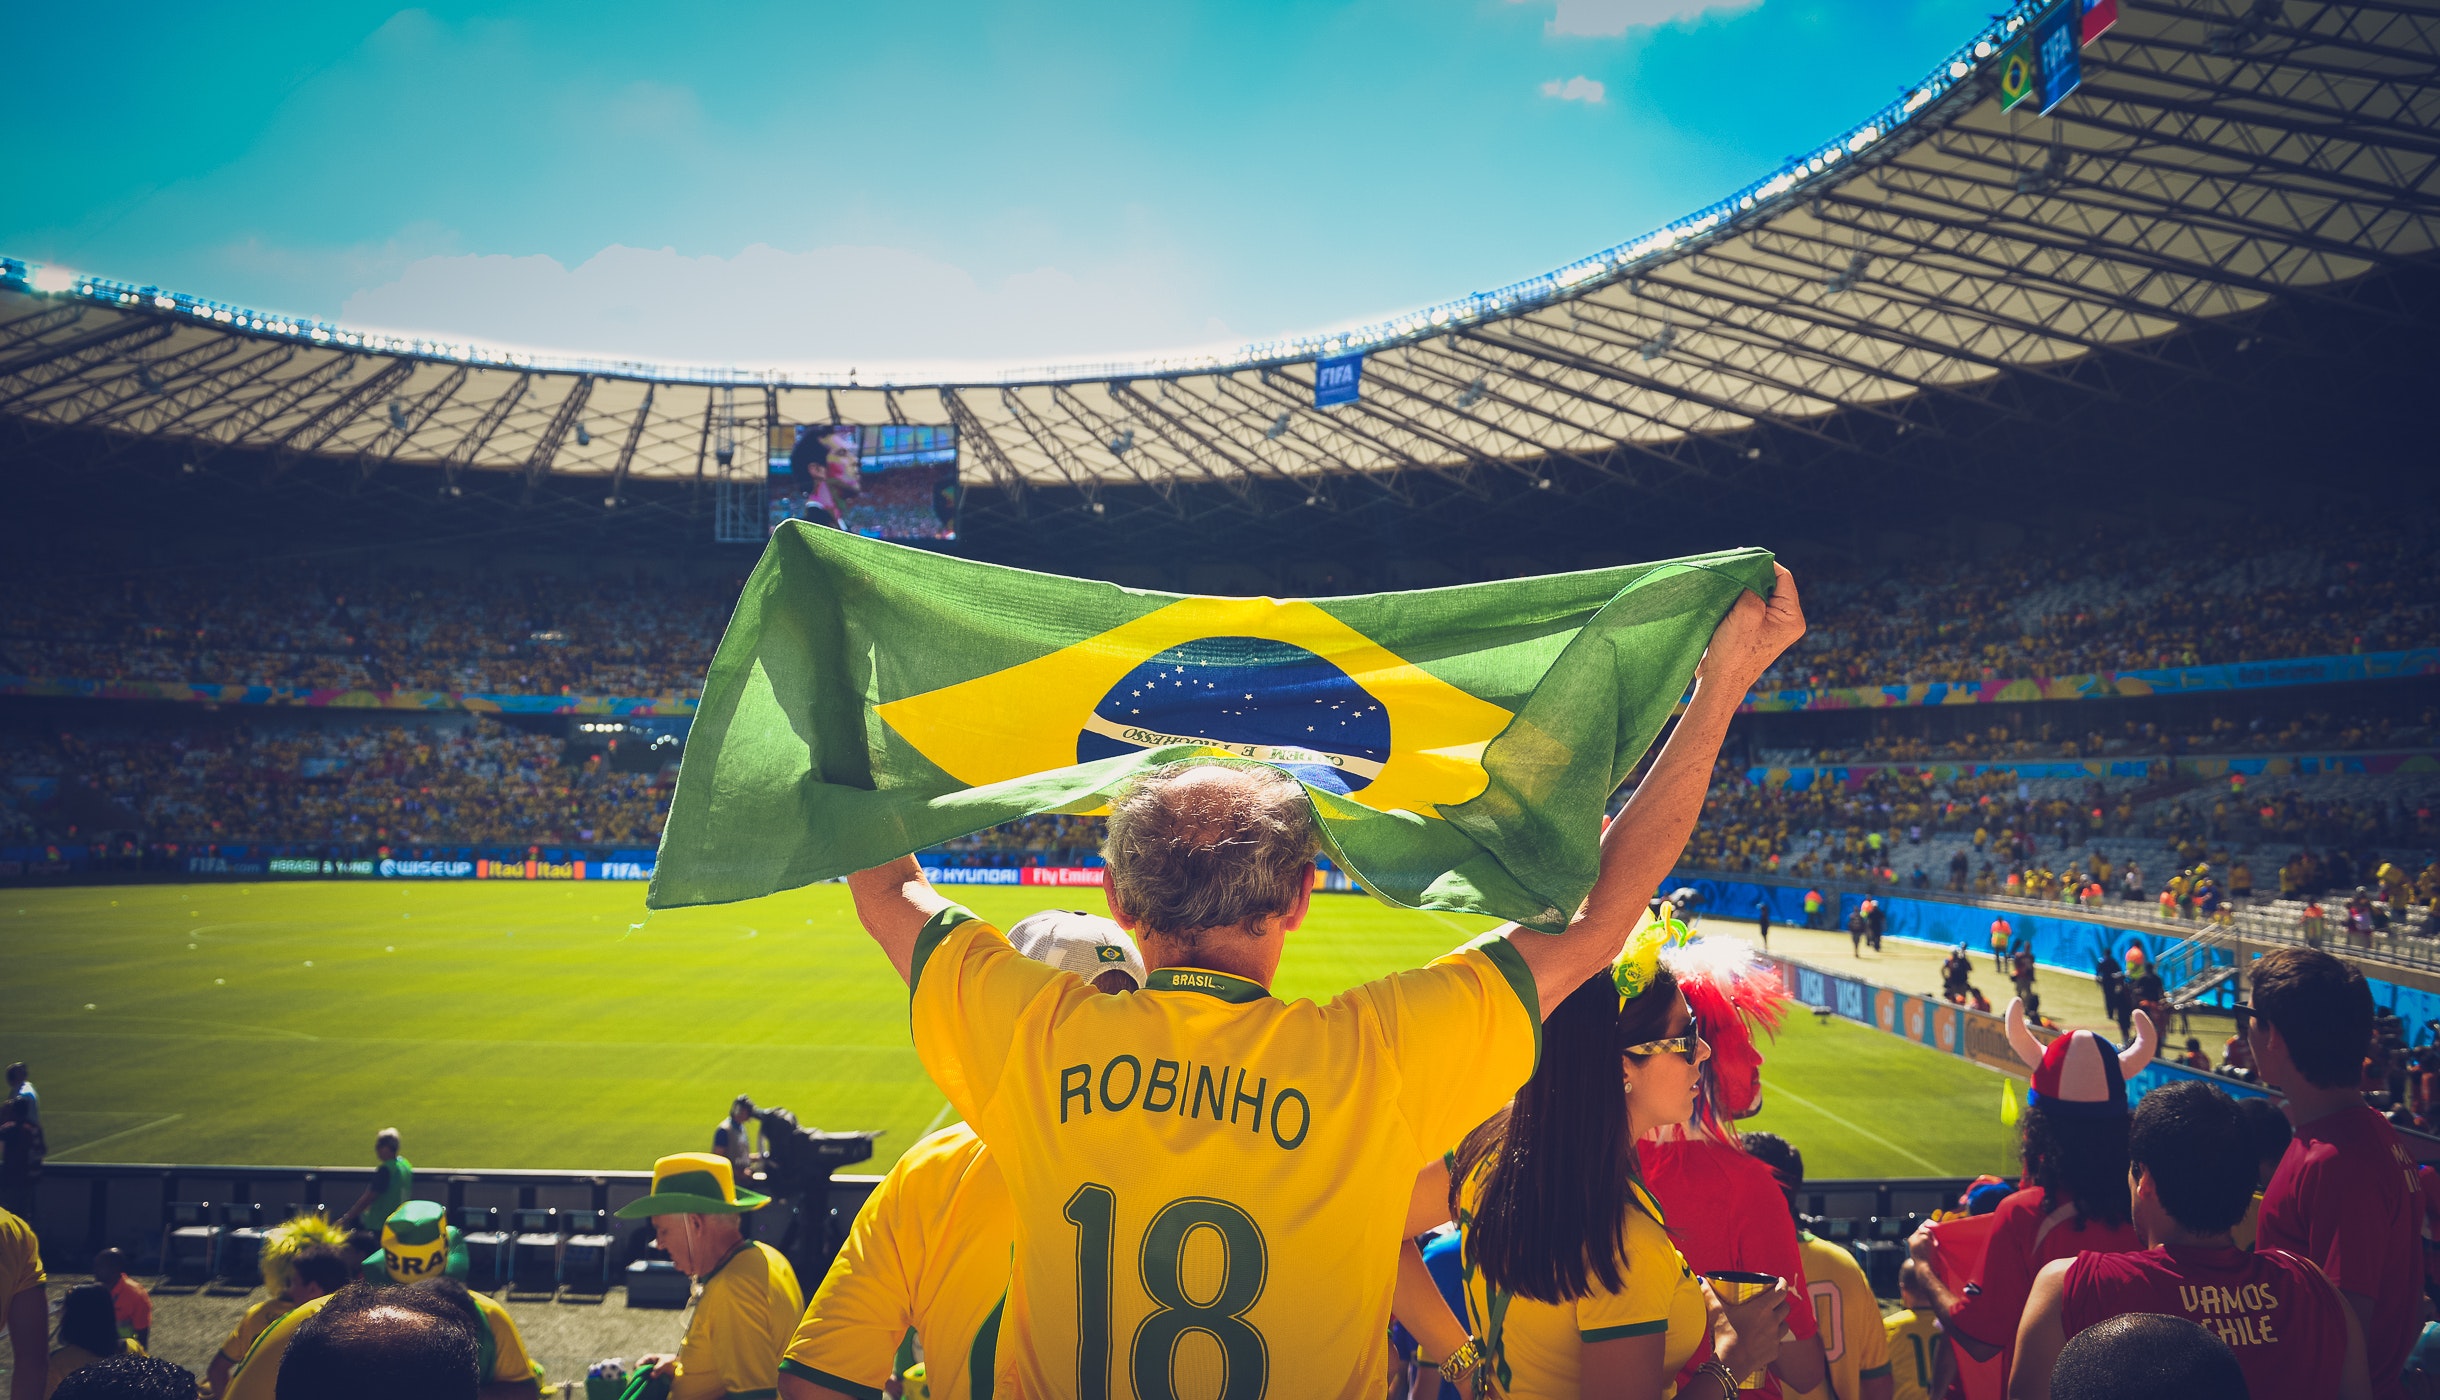 People are cheering for the Brazilian team